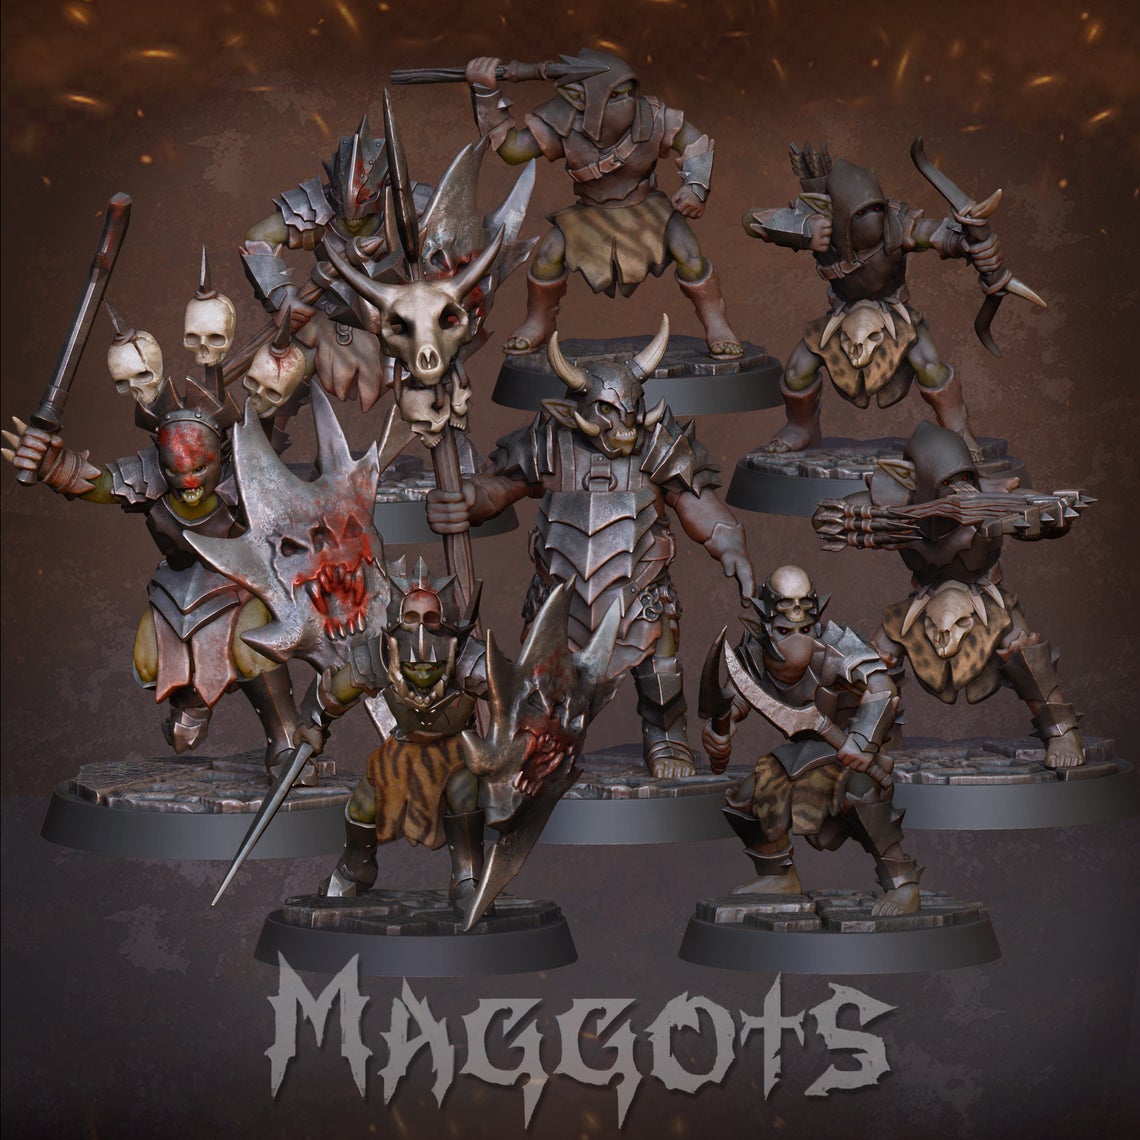 Maggots / Orcs from The Mines: Flames of War by The Mines